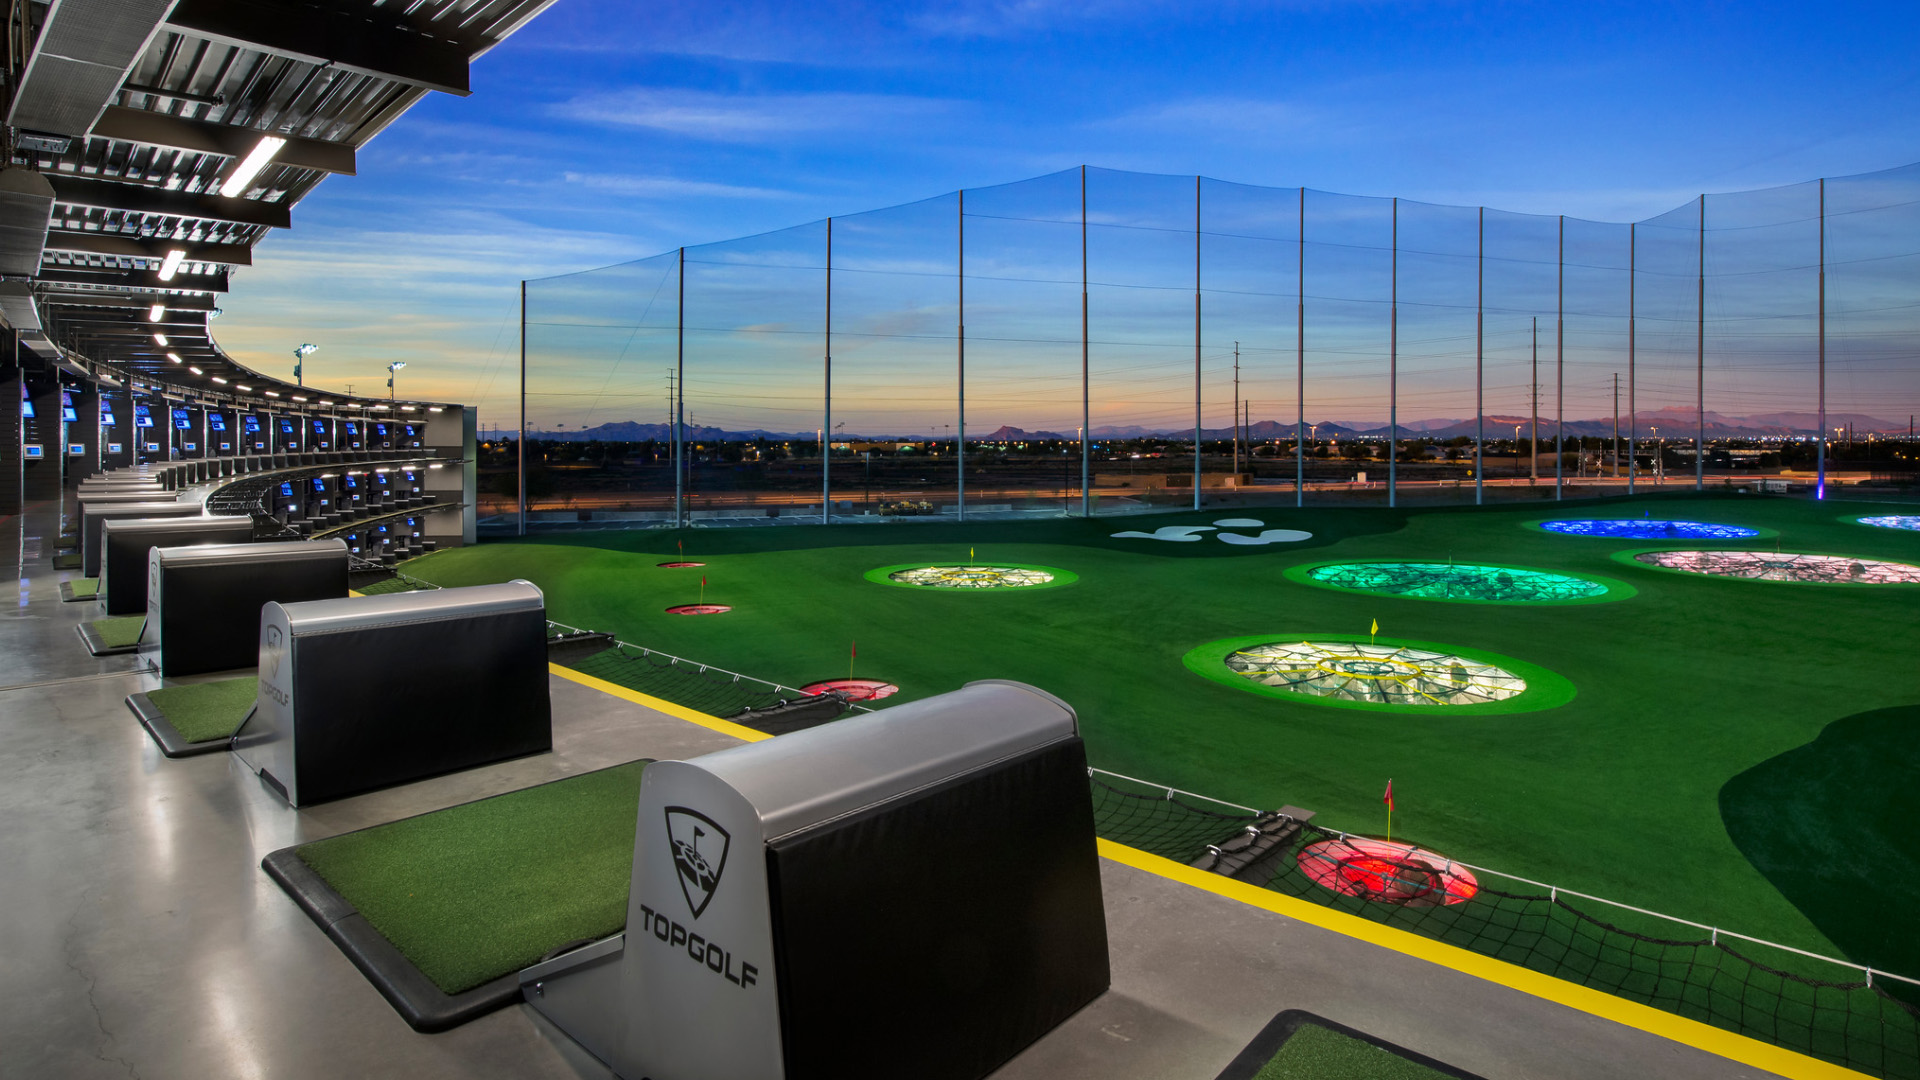 What is top golf?